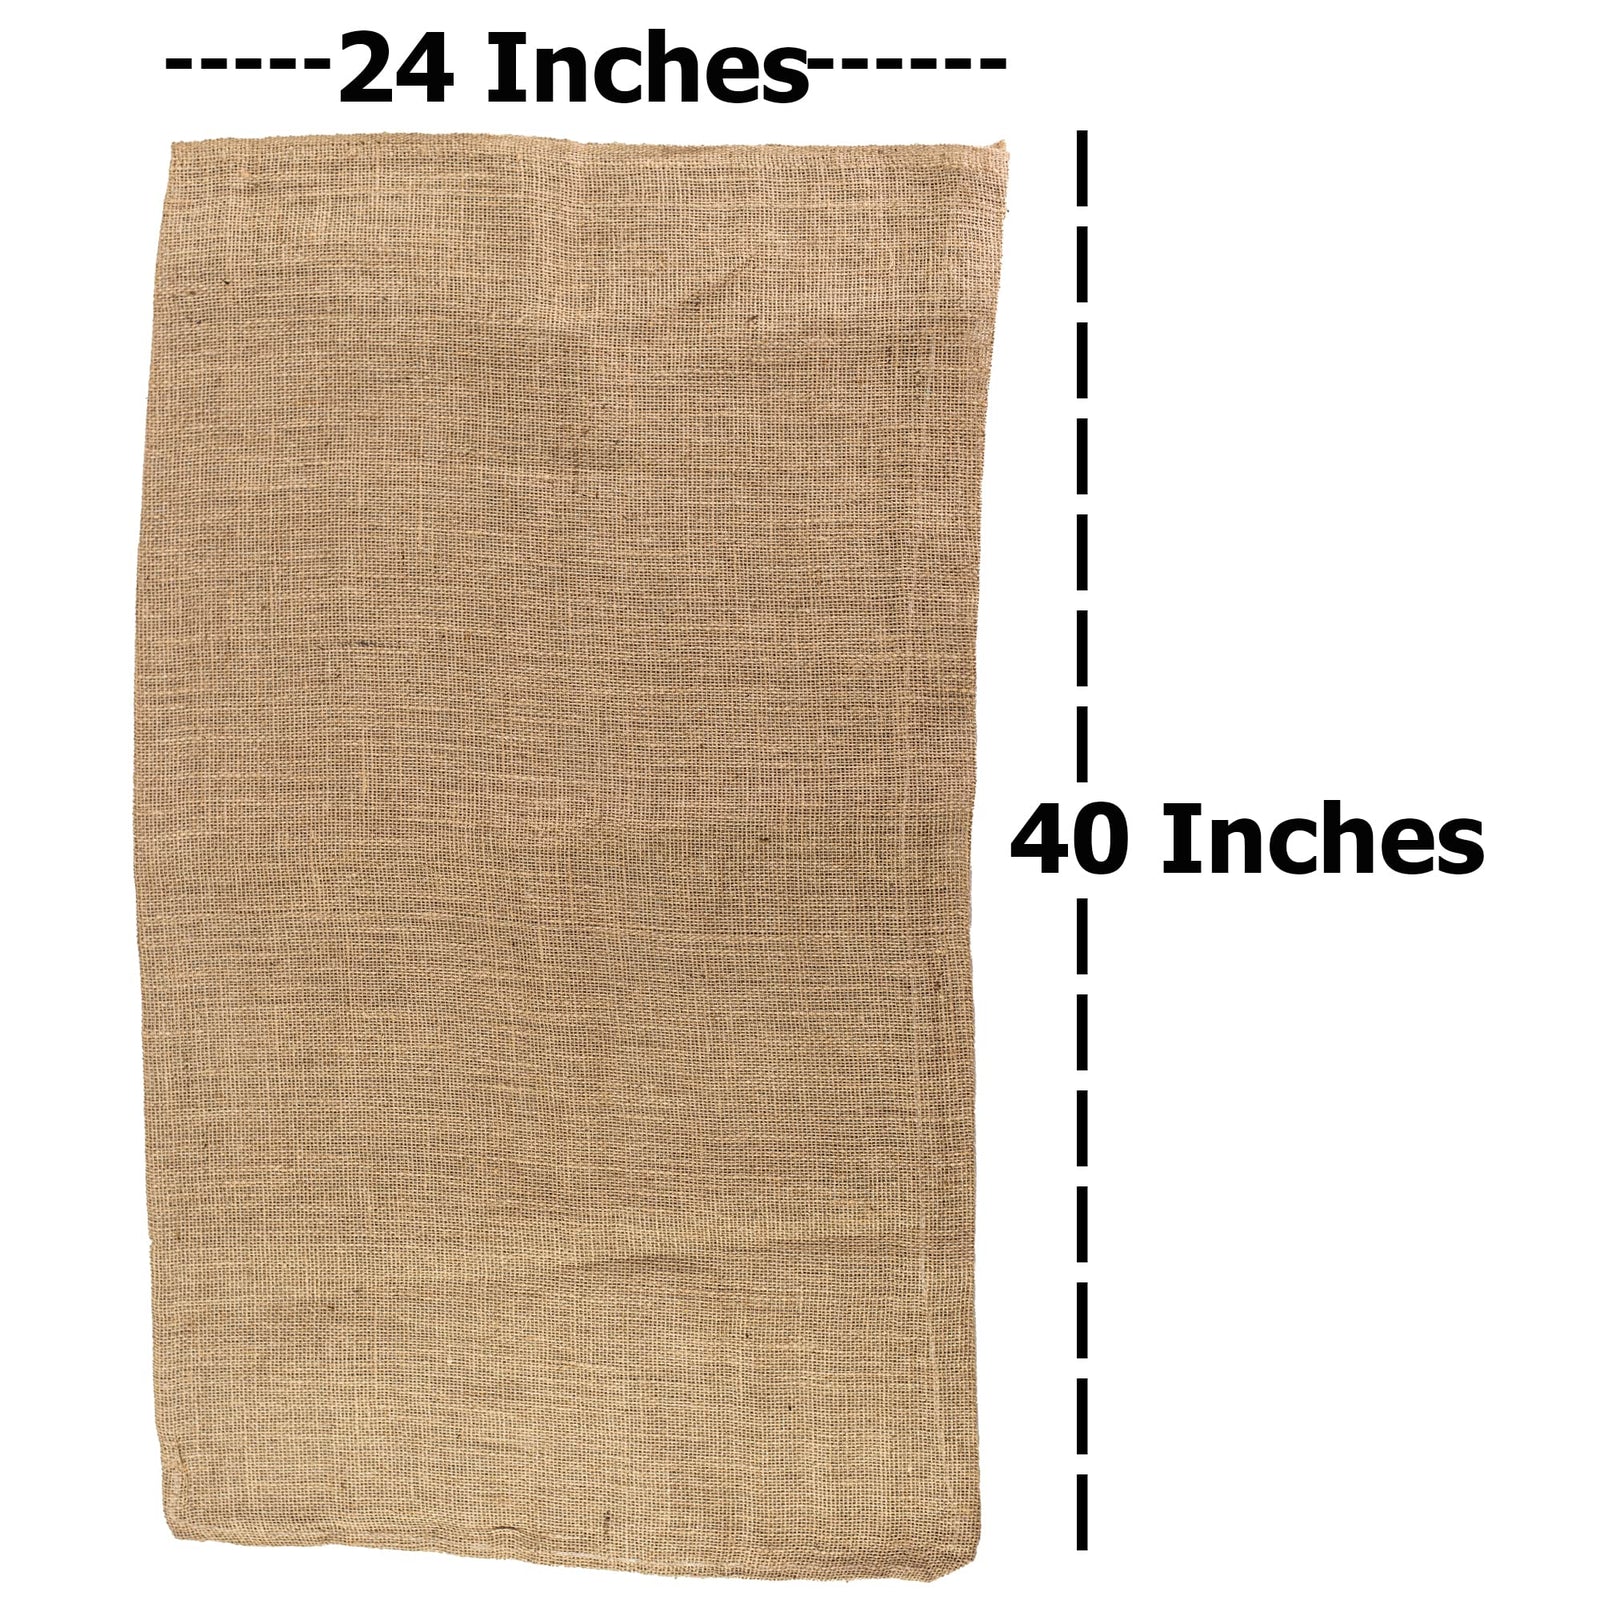 SGT KNOTS Burlap Bag - 24" x 40" Large Gunny Bags - 100% Biodegradable Reusable Food-Safe Sacks Perfect for Outdoor Games and Races Storing Vegetables and More Available in Single, 4, 6 and 8 Packs